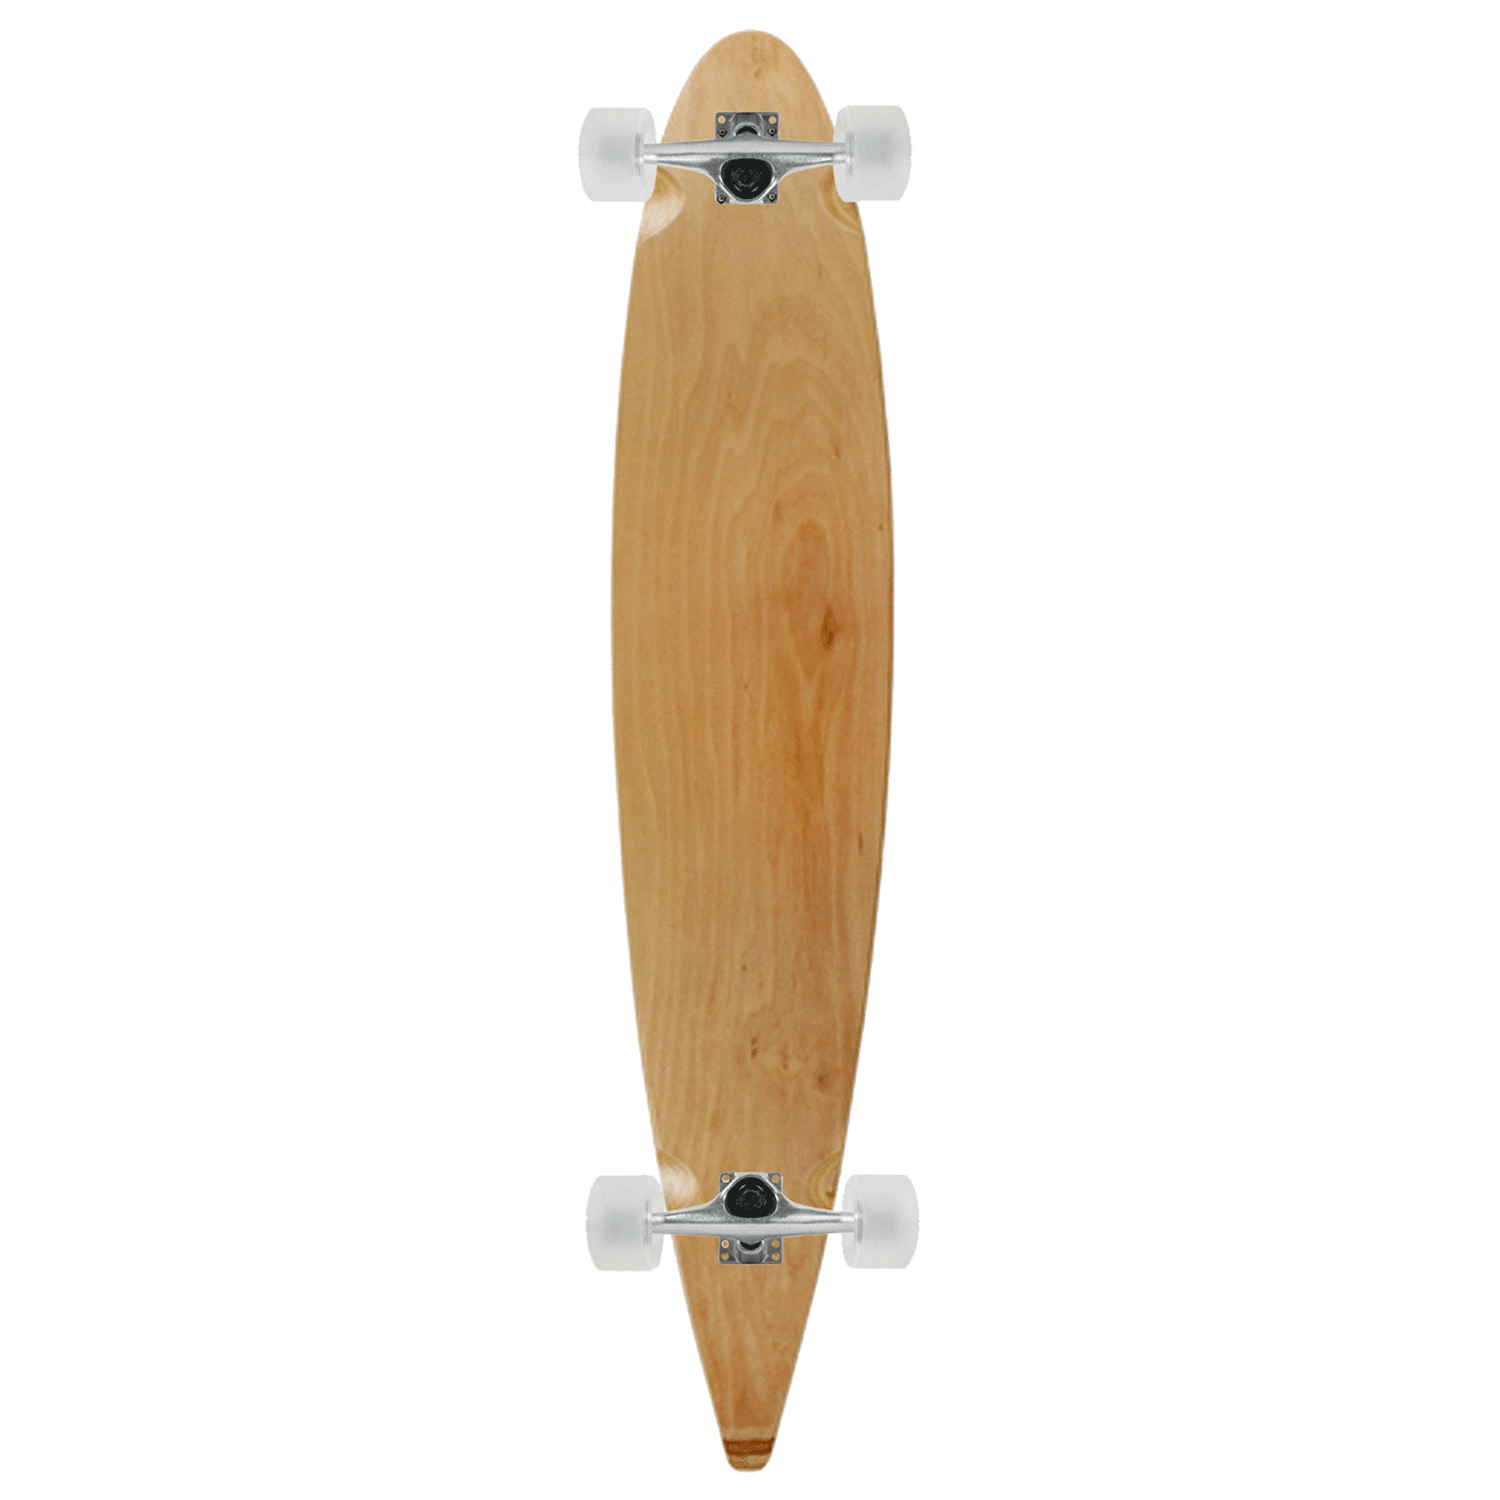 Complete Longboards from Moose Skateboards and Longboards